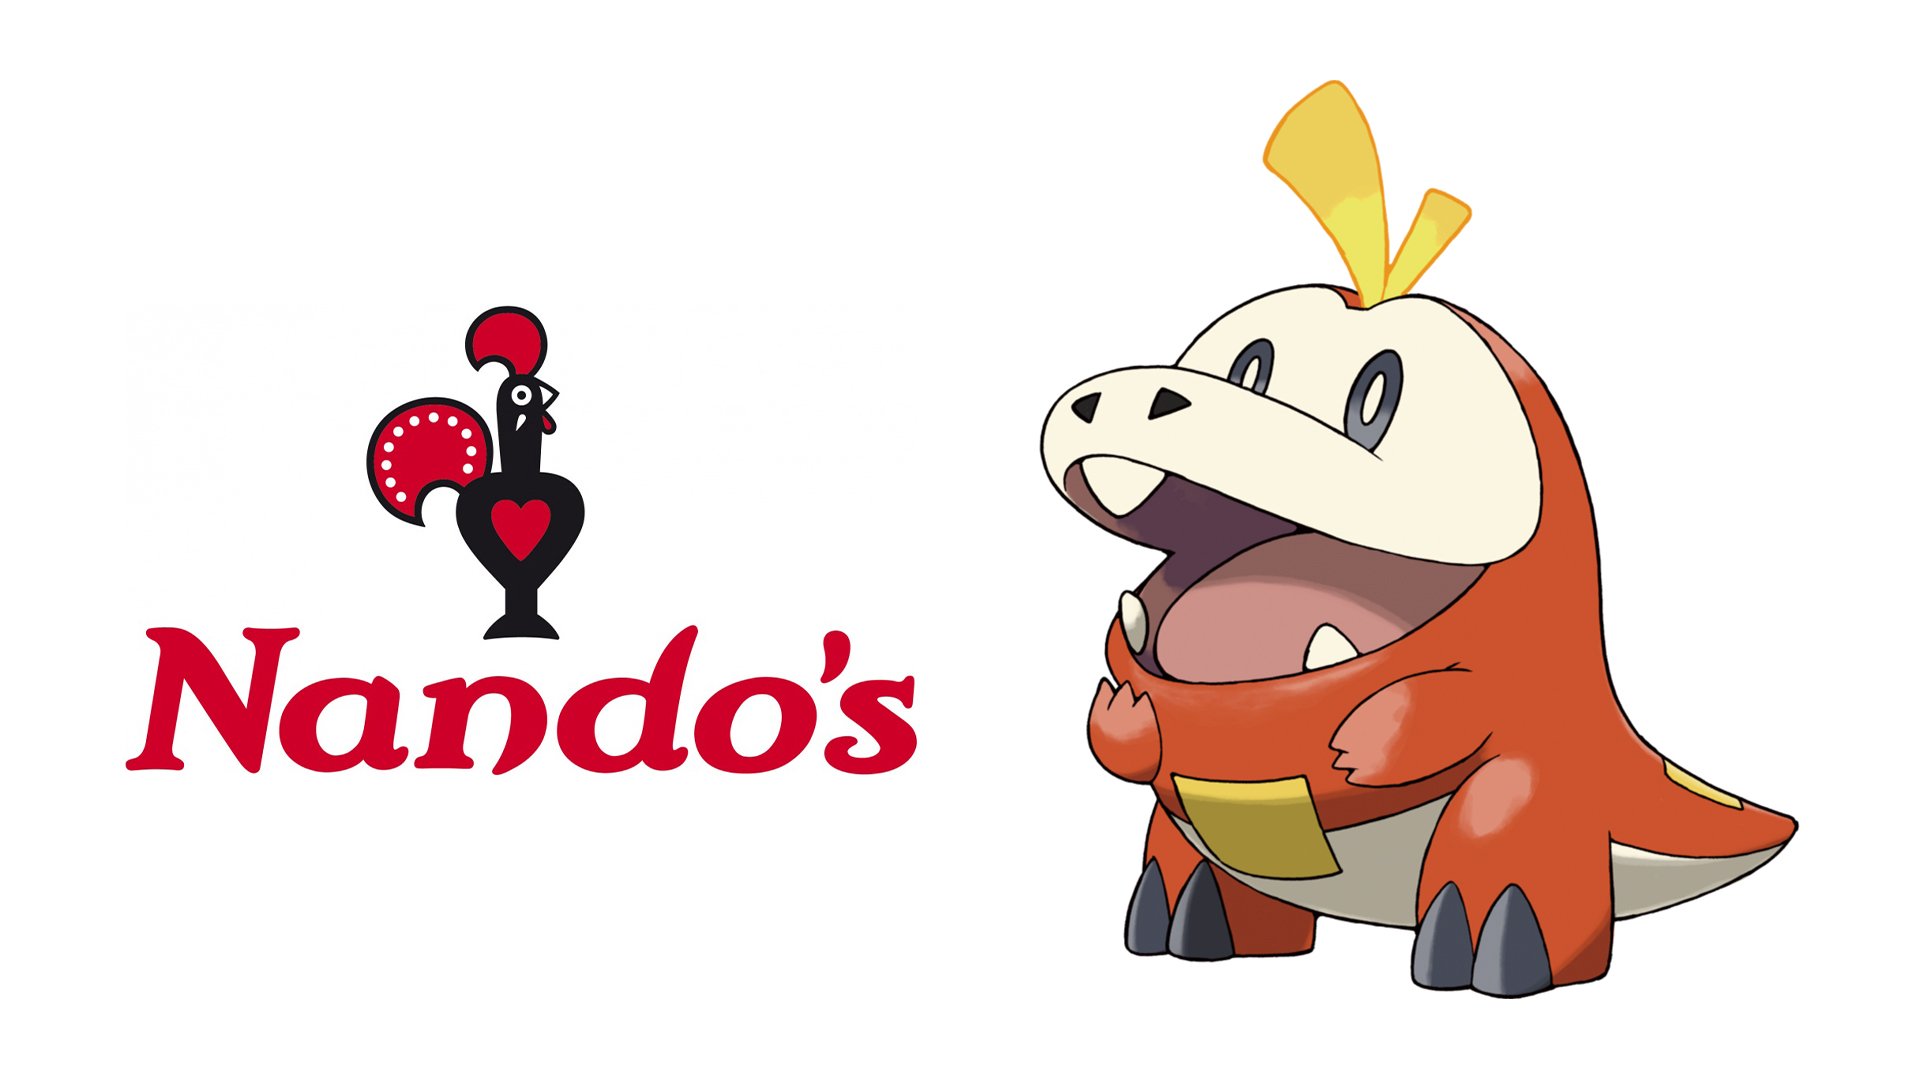 Fans think a trip to Nando's inspired Pokémon Scarlet and Violet